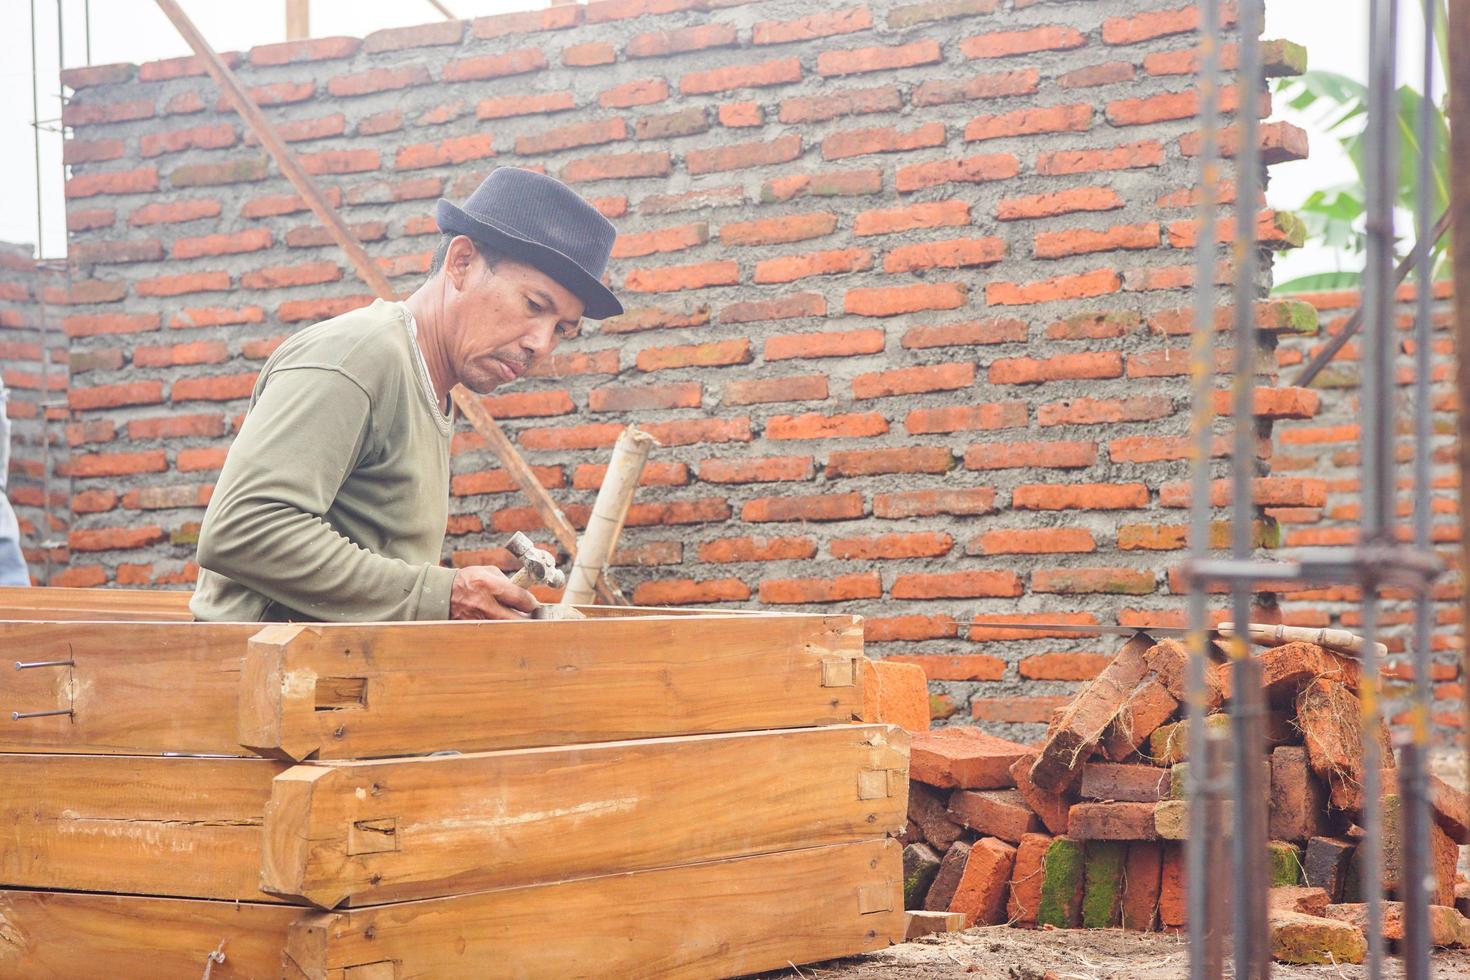 Tegal, Jawa Tengah, 2022 - construction worker taking measurements and hammering to mark on wooden door photo